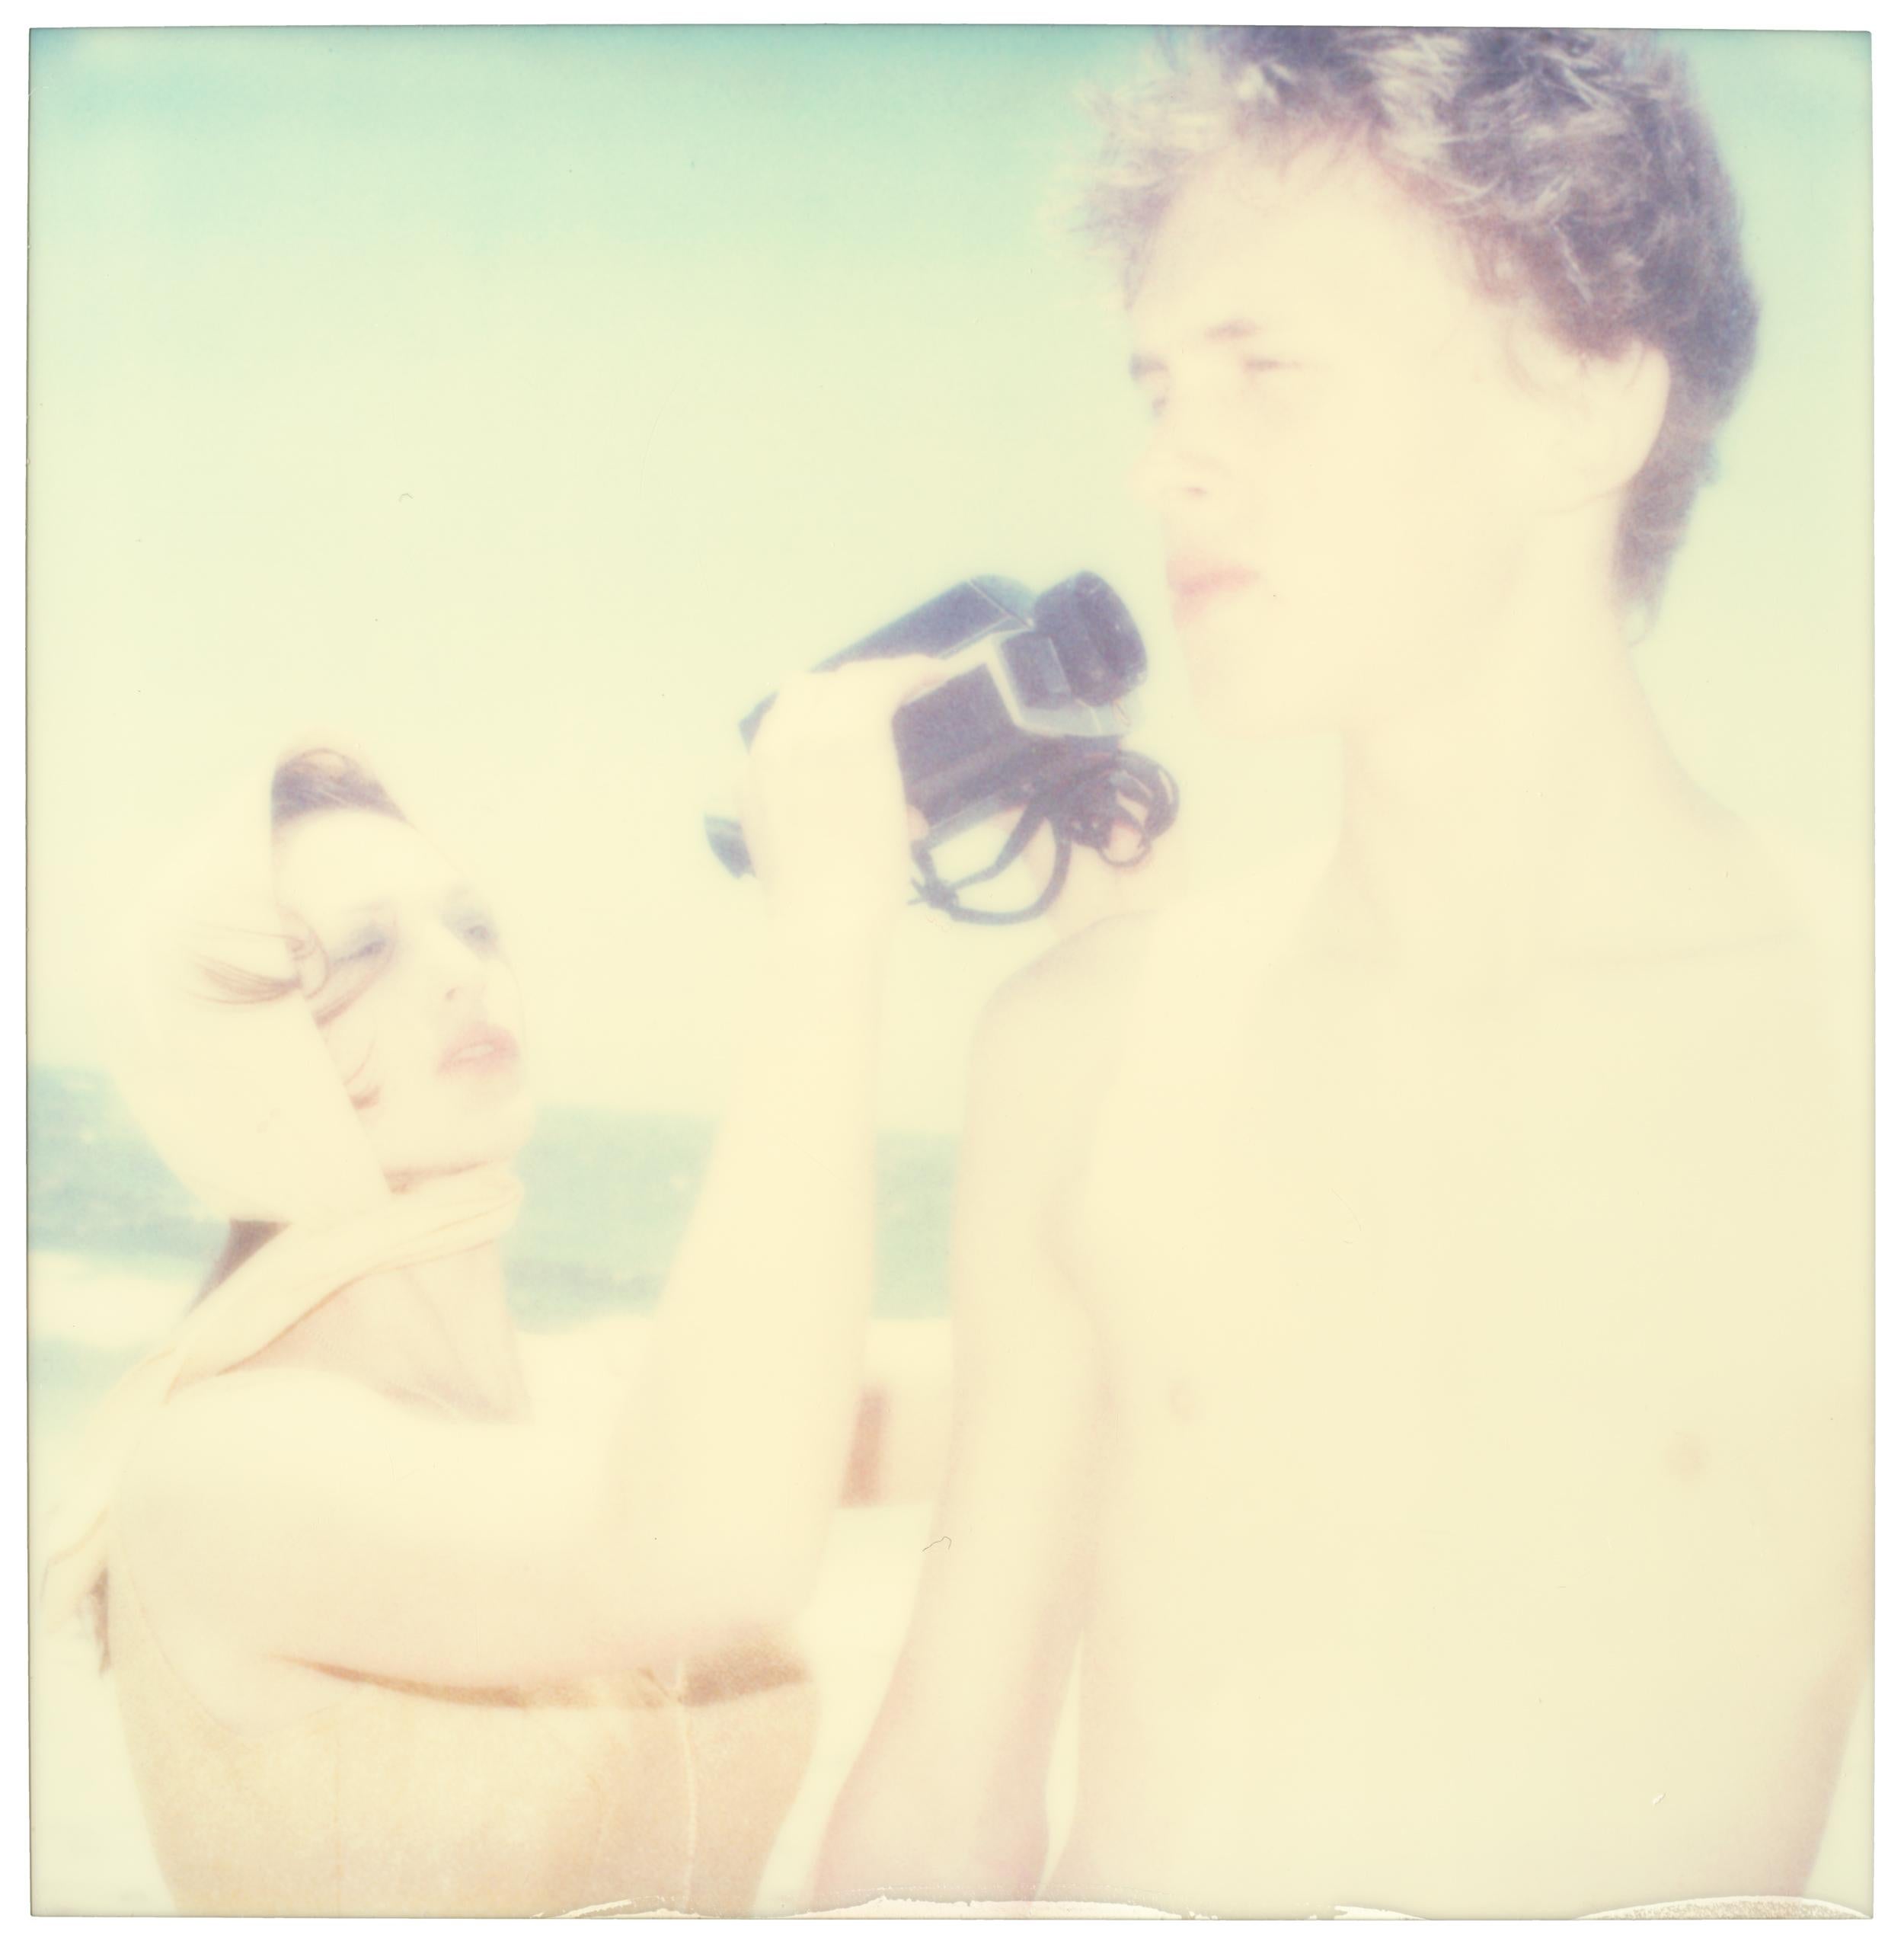 The Diva and the Boy (Beachshoot) - 2005

Edition of 10 plus 2 artist Proofs. 
48x46cm each, installed 155x151cm. 
9 archival C-Prints, based on 9 Polaroids. 
Certificate and Signature label, 
artist Inventory # 1461. 
Not